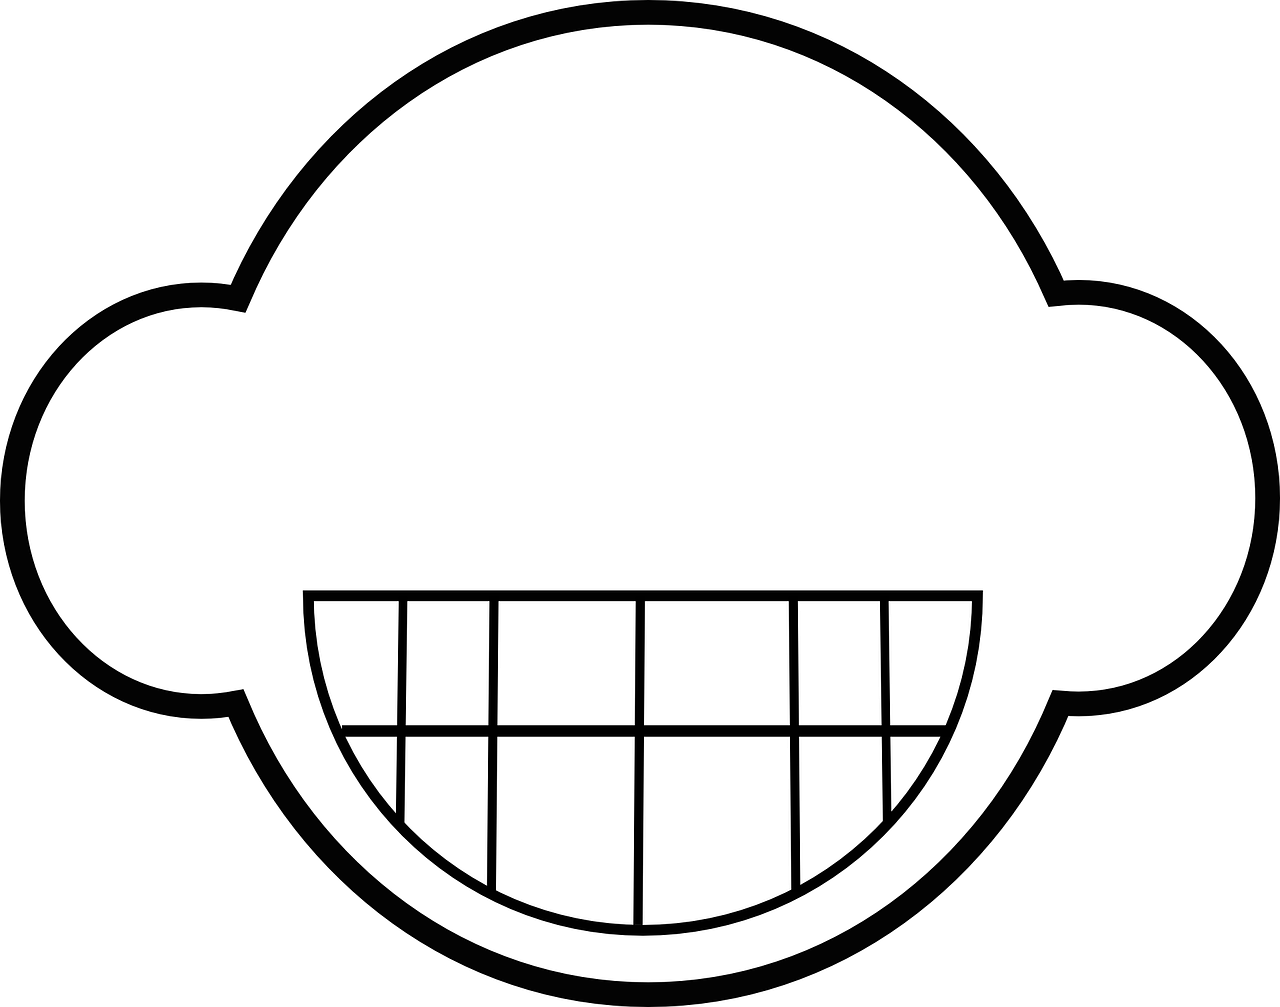 grinning face abstract free photo